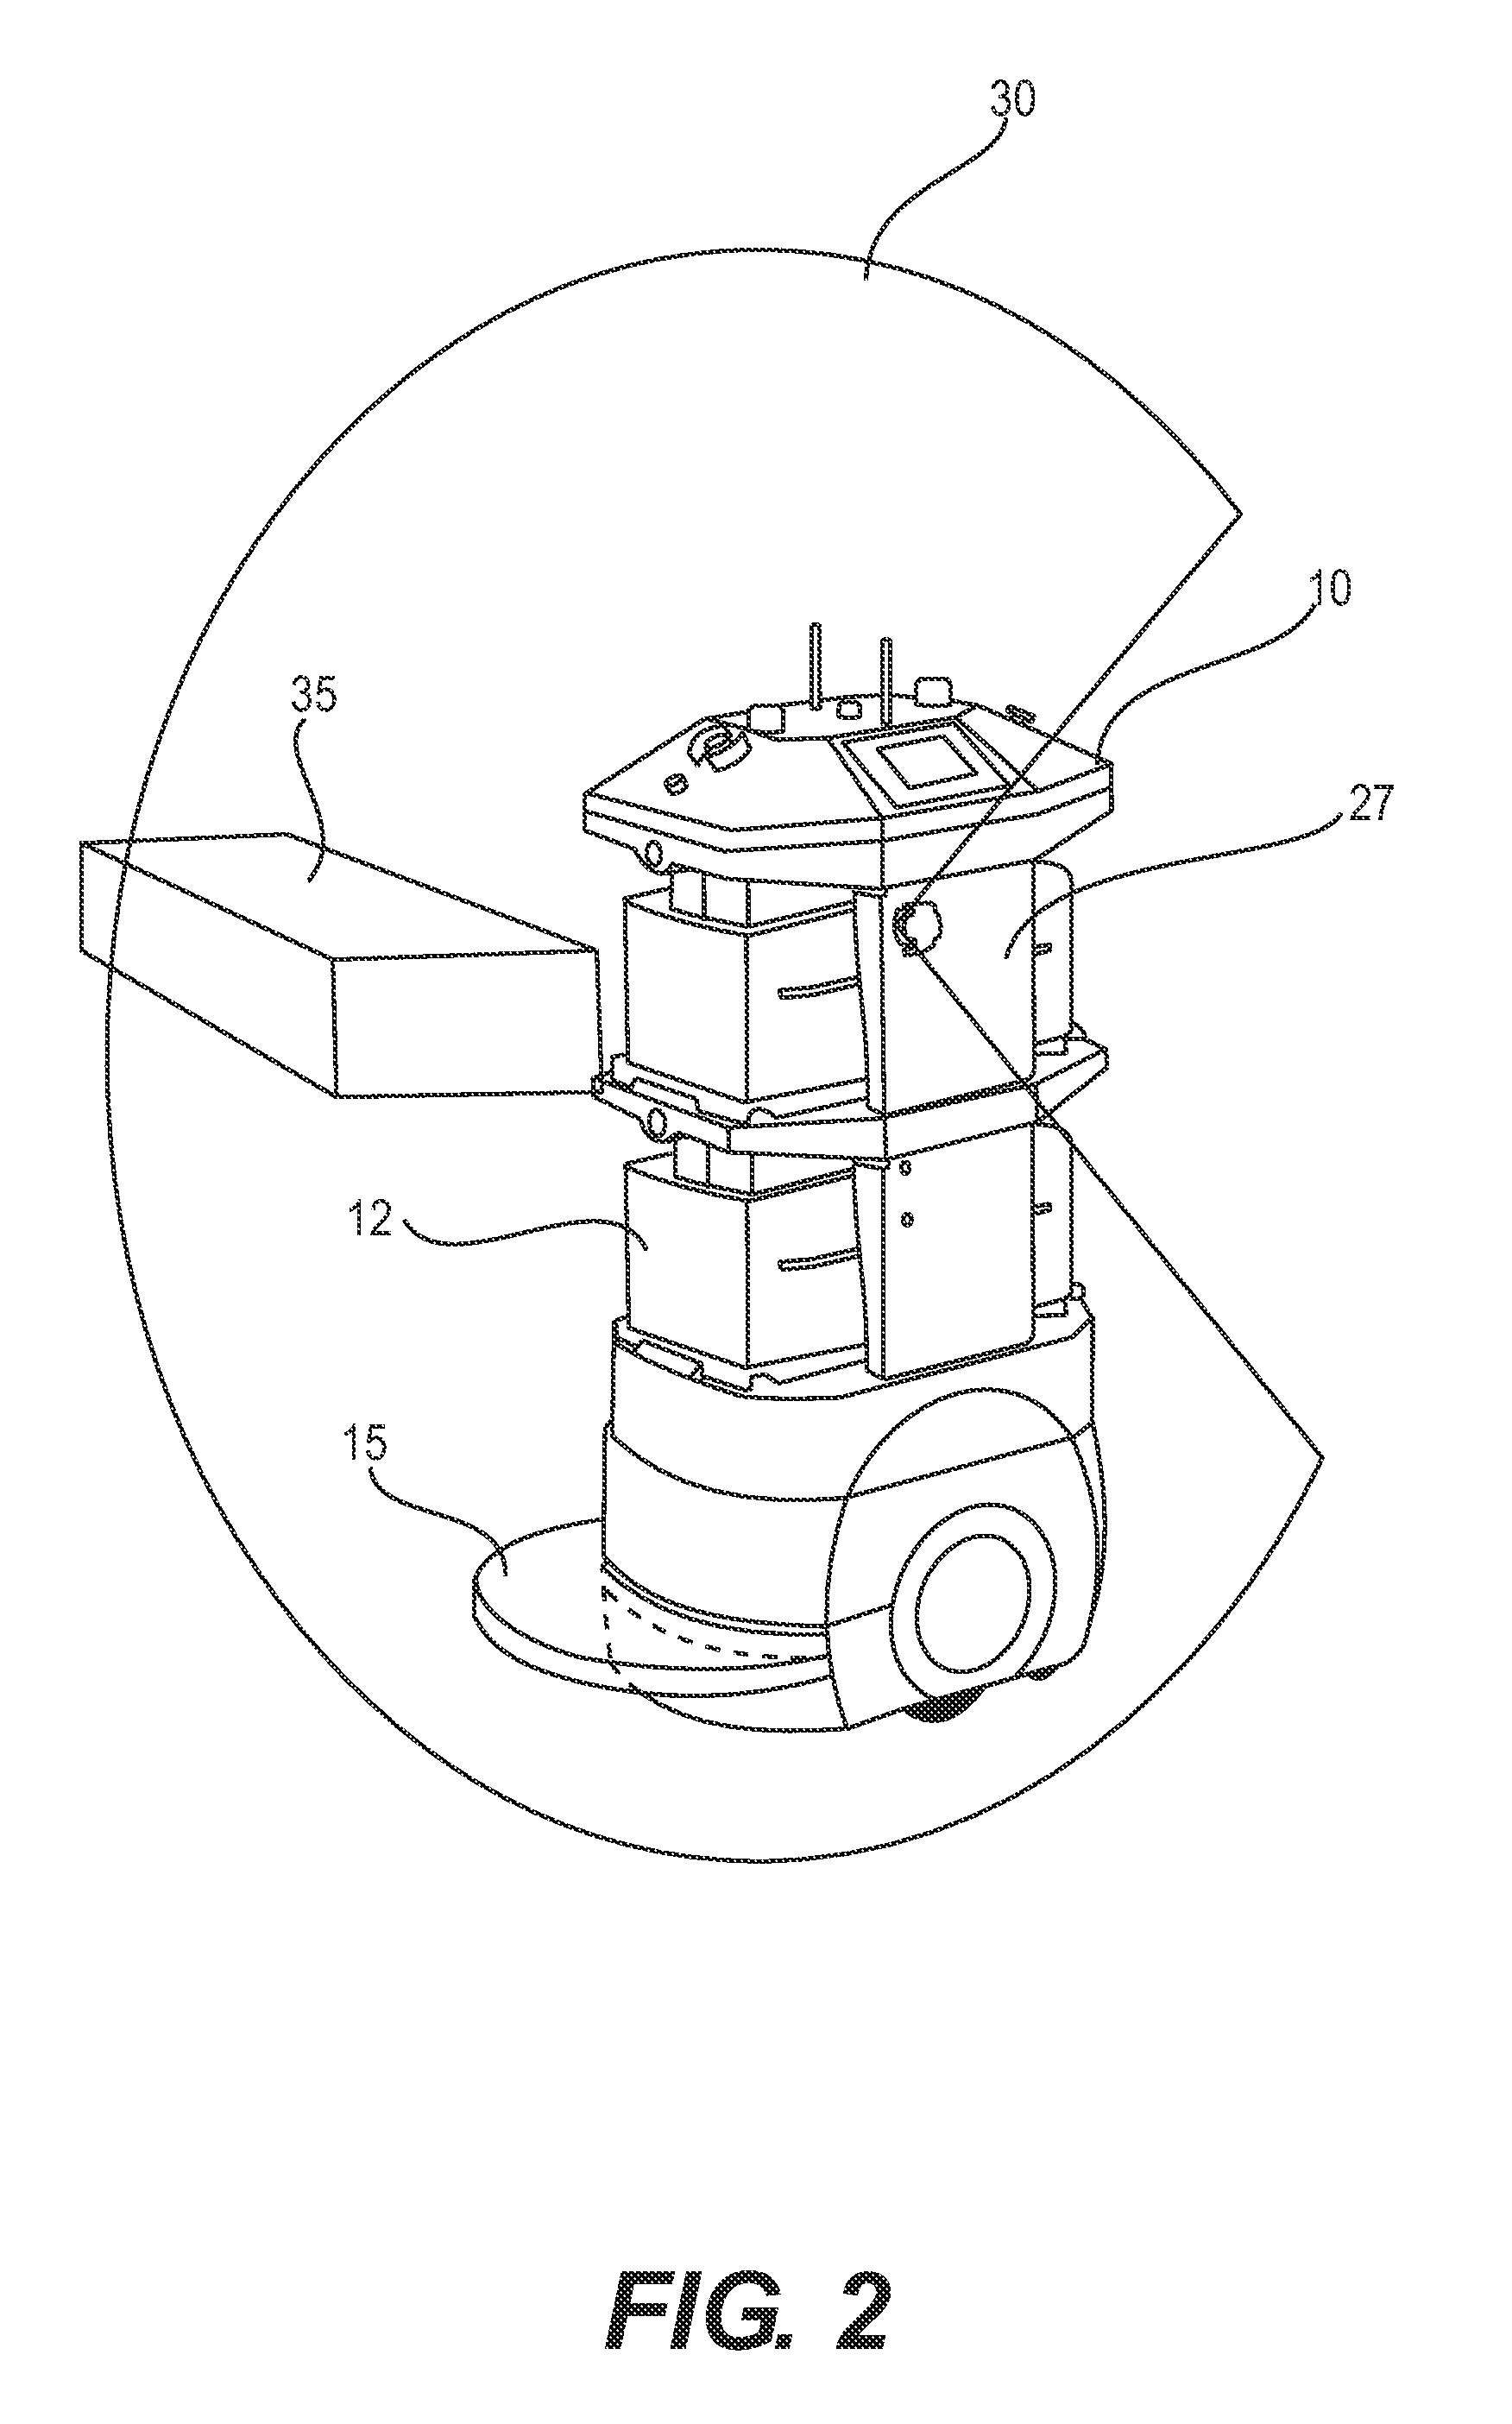 Positive and negative obstacle avoidance system and method for a mobile robot